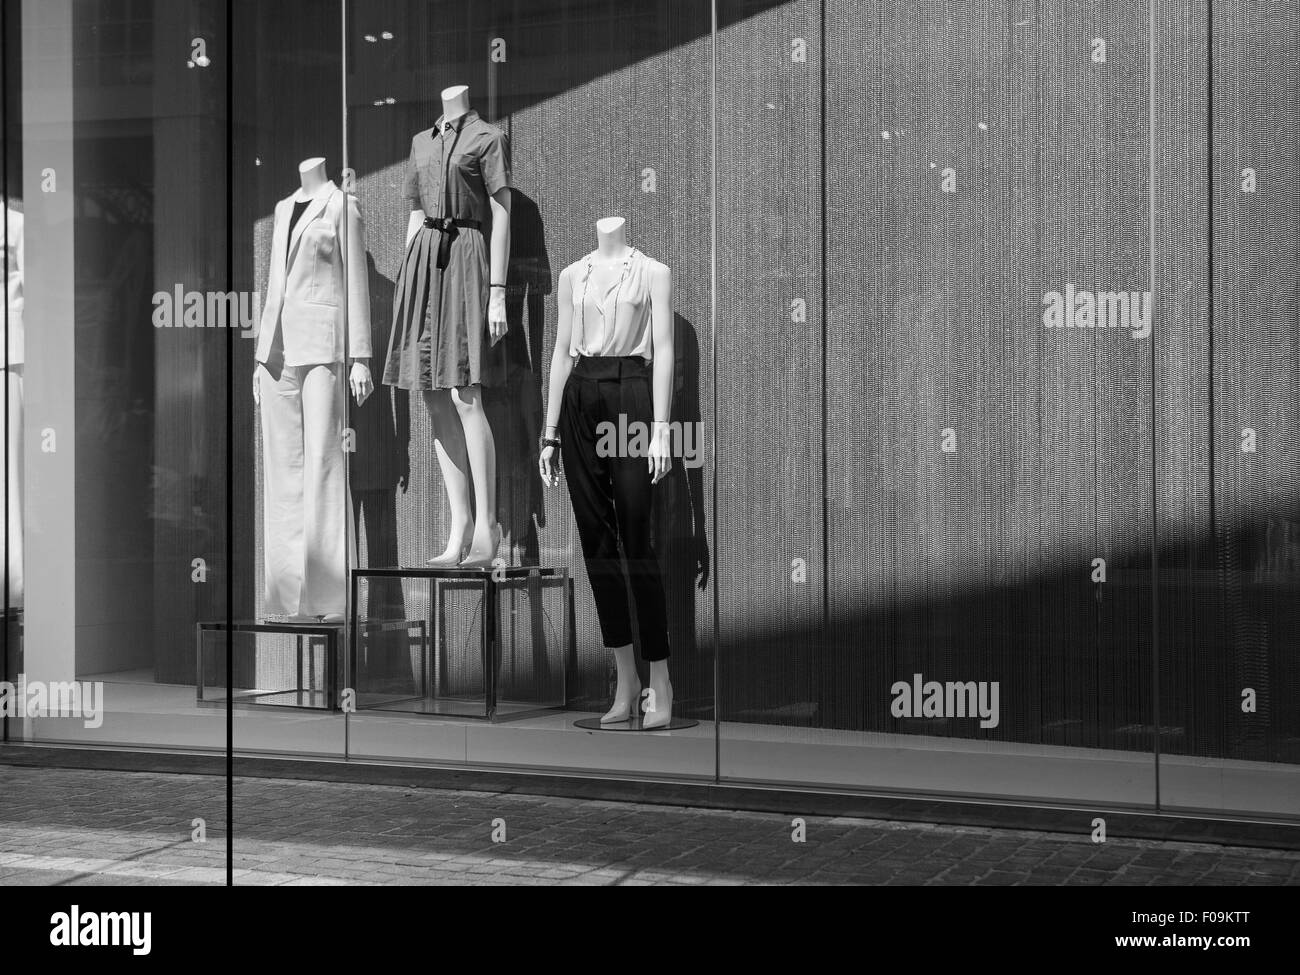 Boutique display window with mannequins in fashionable dresses Stock Photo